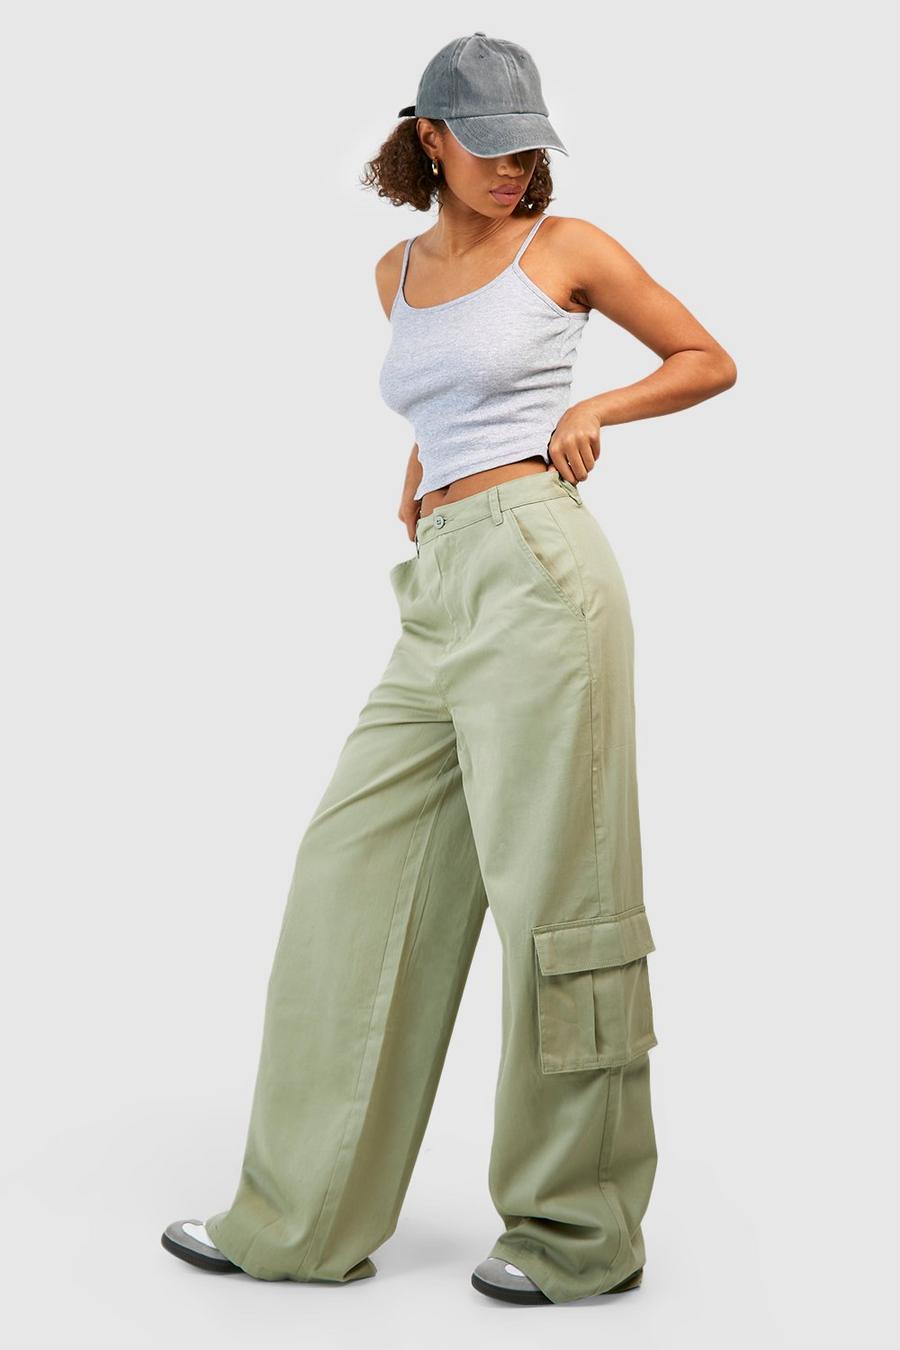 Women's Casual Cargo Pants Flared High Waist Relaxed Fit Stretchable Solid  Trousers